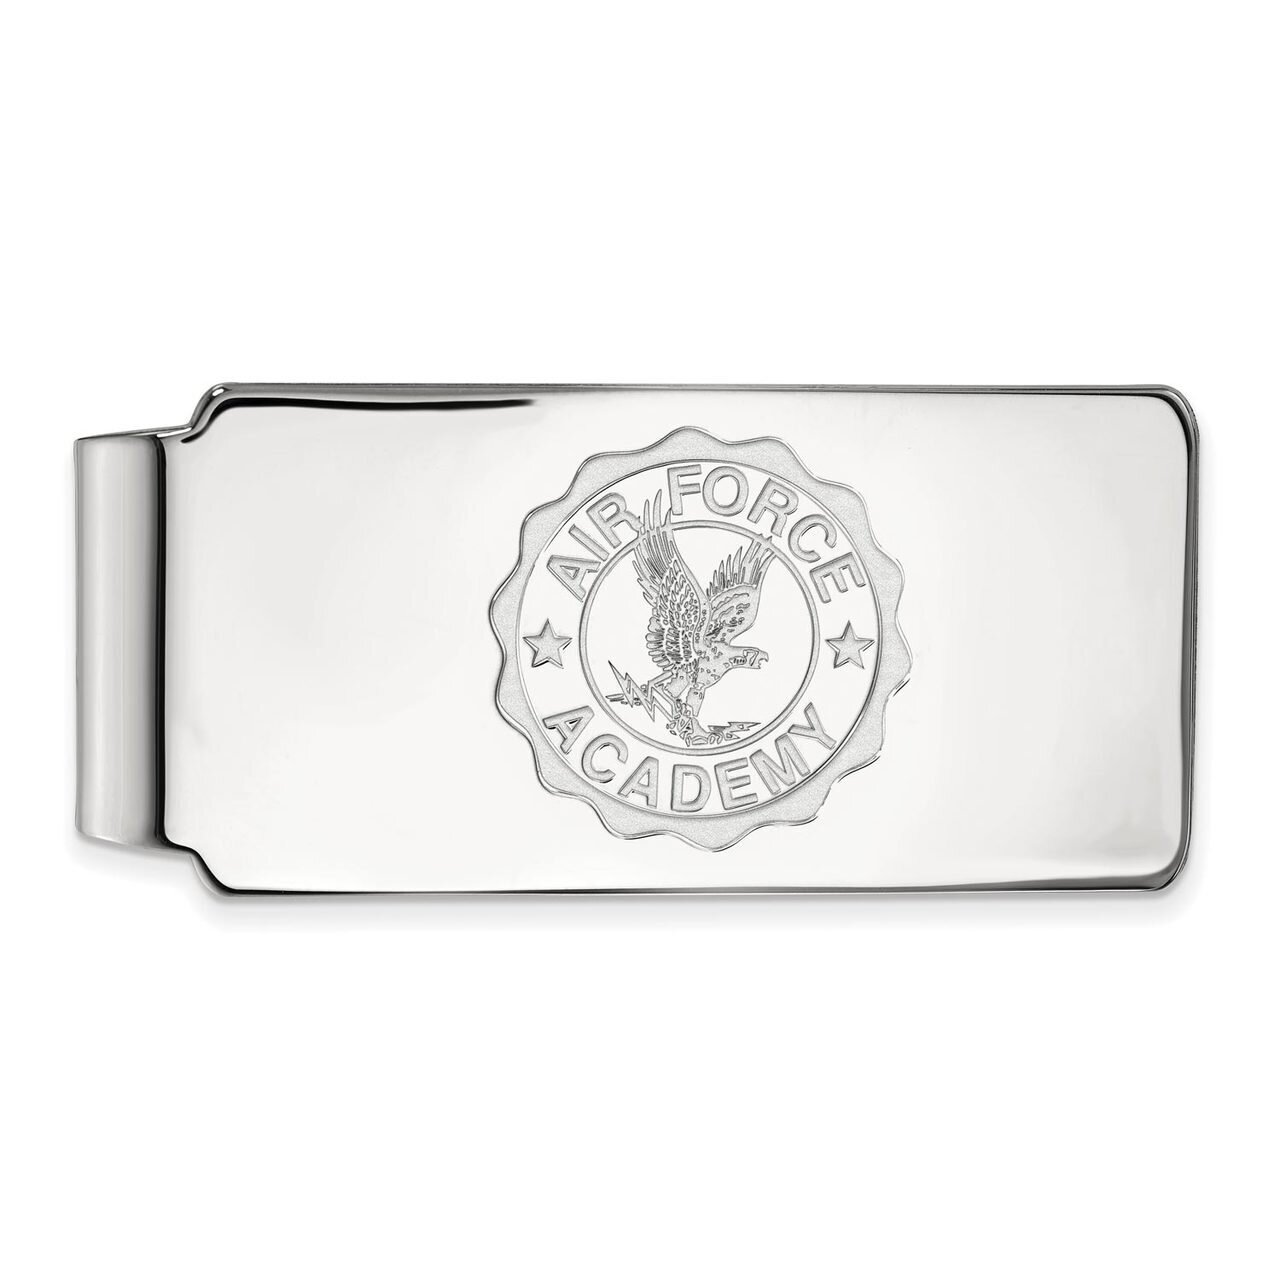 United States Air Force Academy Money Clip Crest 14k White Gold 4W026USA